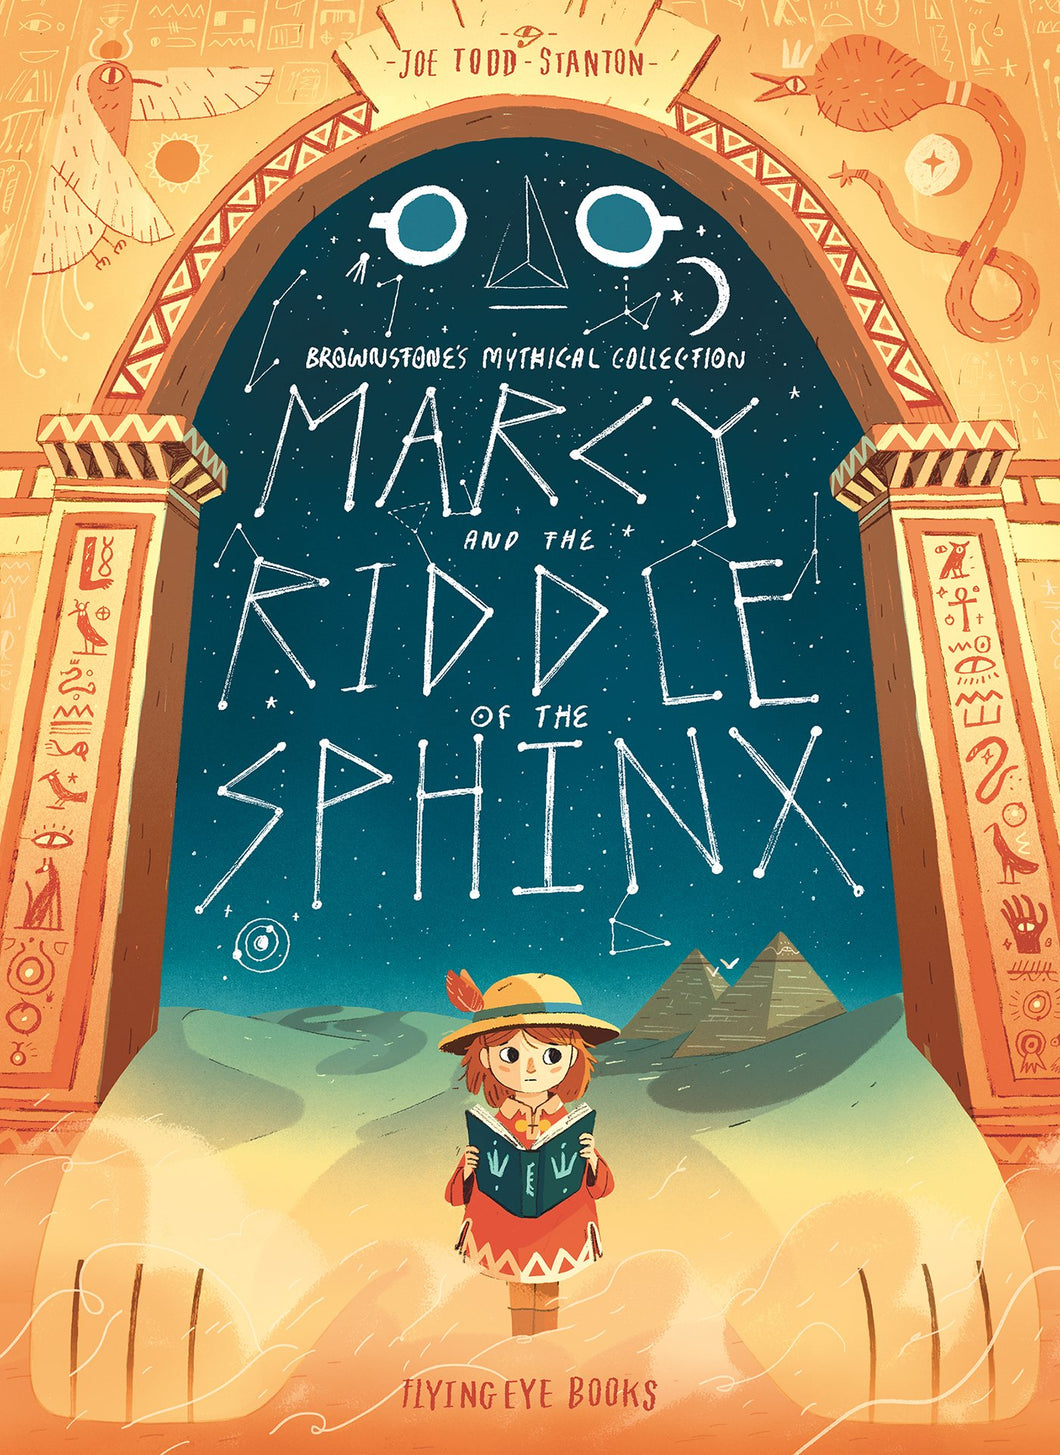 Marcy and the Riddle of the Sphinx (Brownstone's Mythical Collection 2) by Joe Todd-Stanton